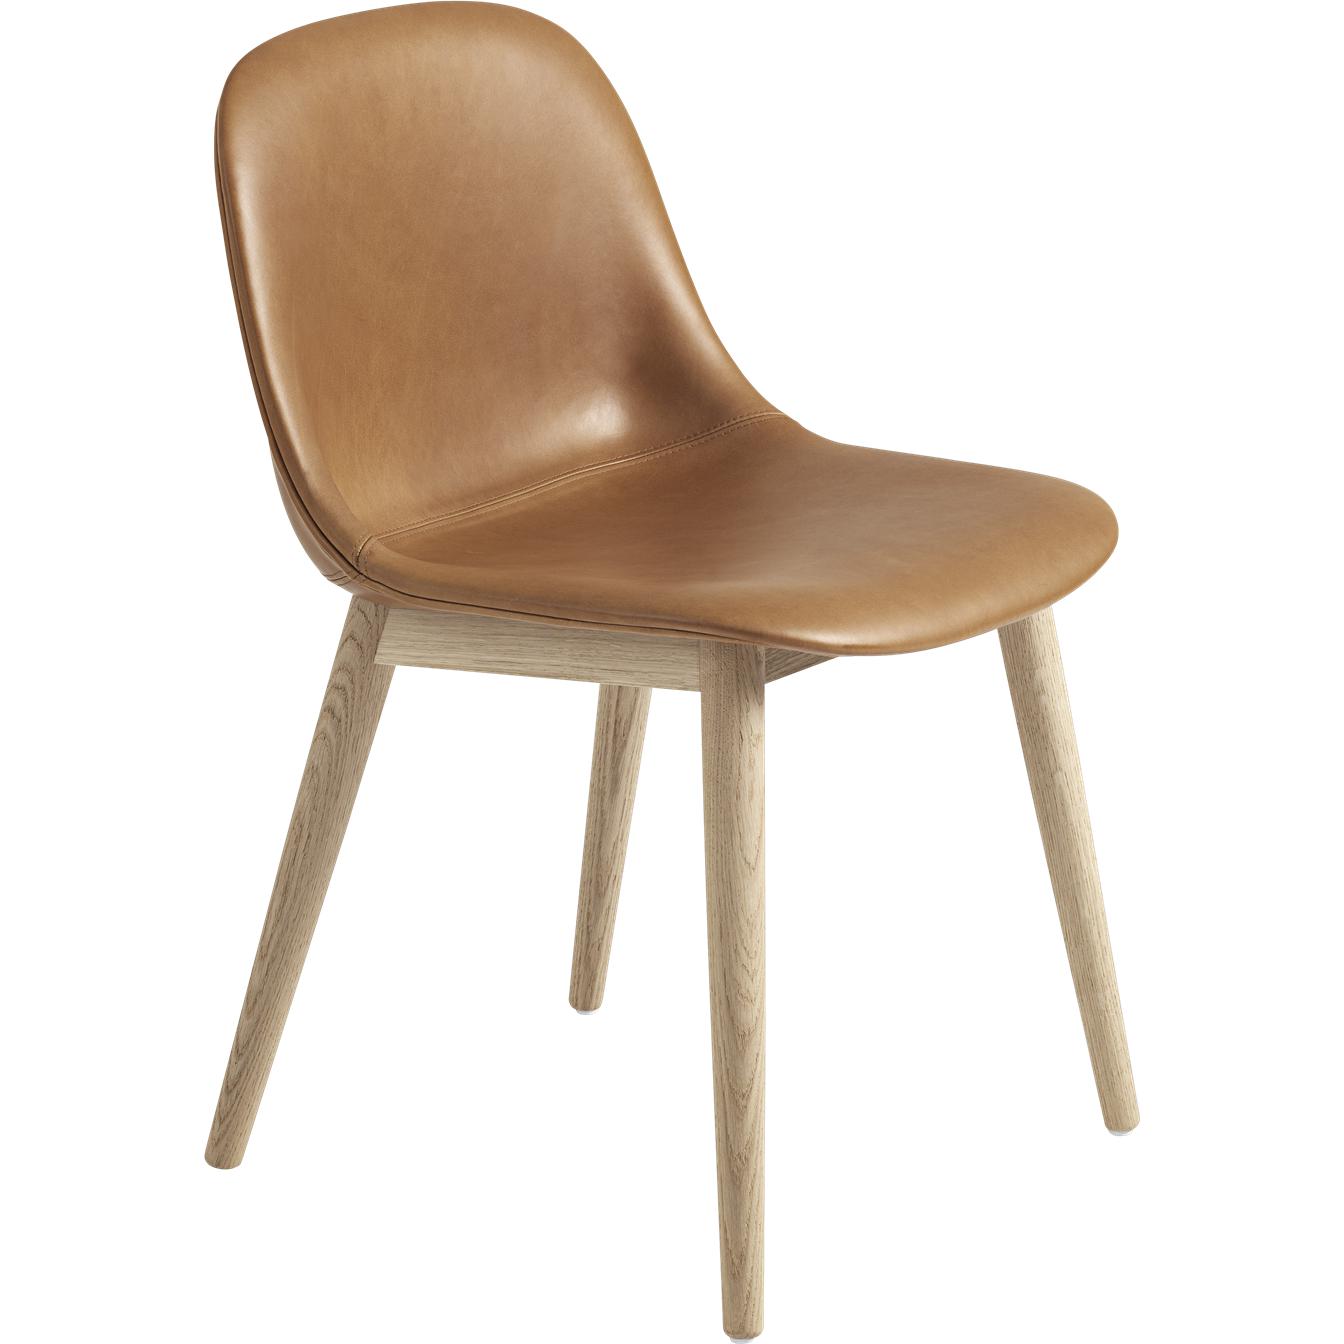 Muuto Fiber Side Chair Wood Ben, Leather Seat, Brown Cognac Leather